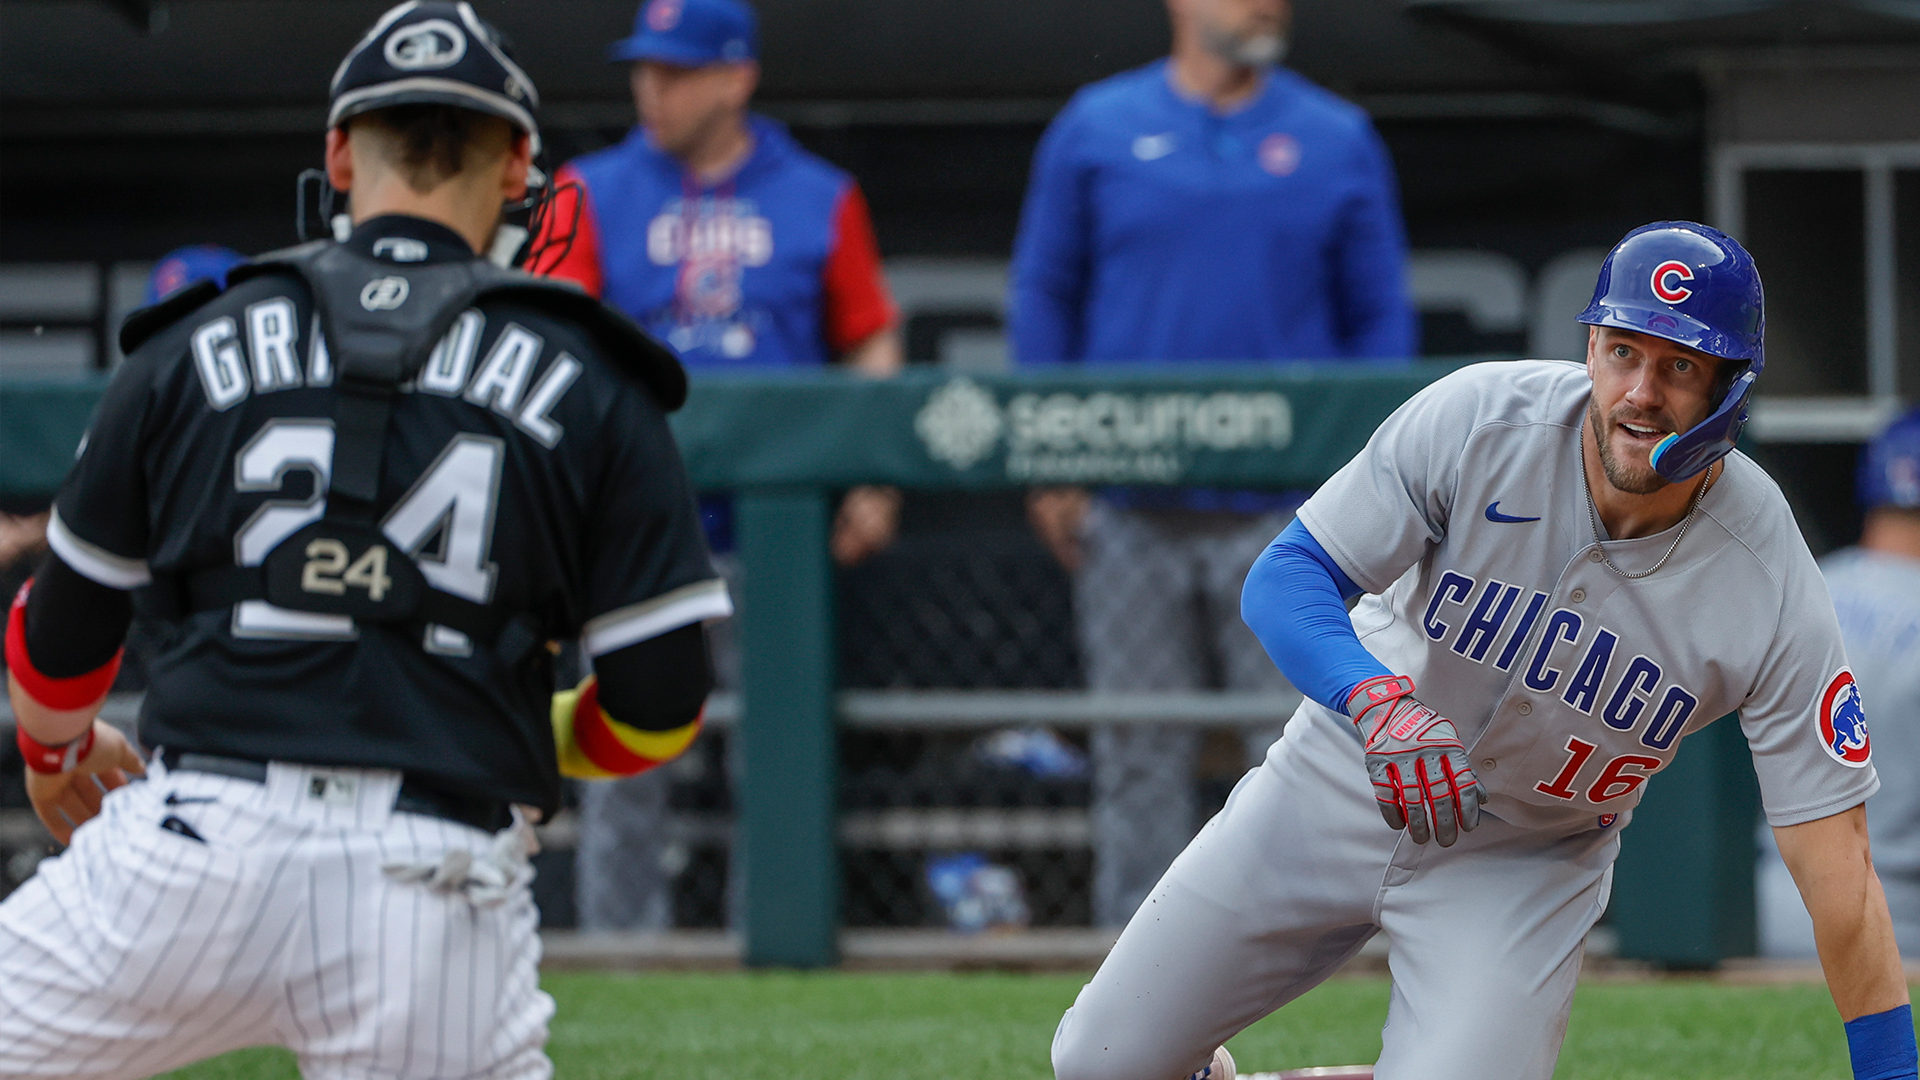 Five things to watch in the first round of the White Sox-Cubs city series